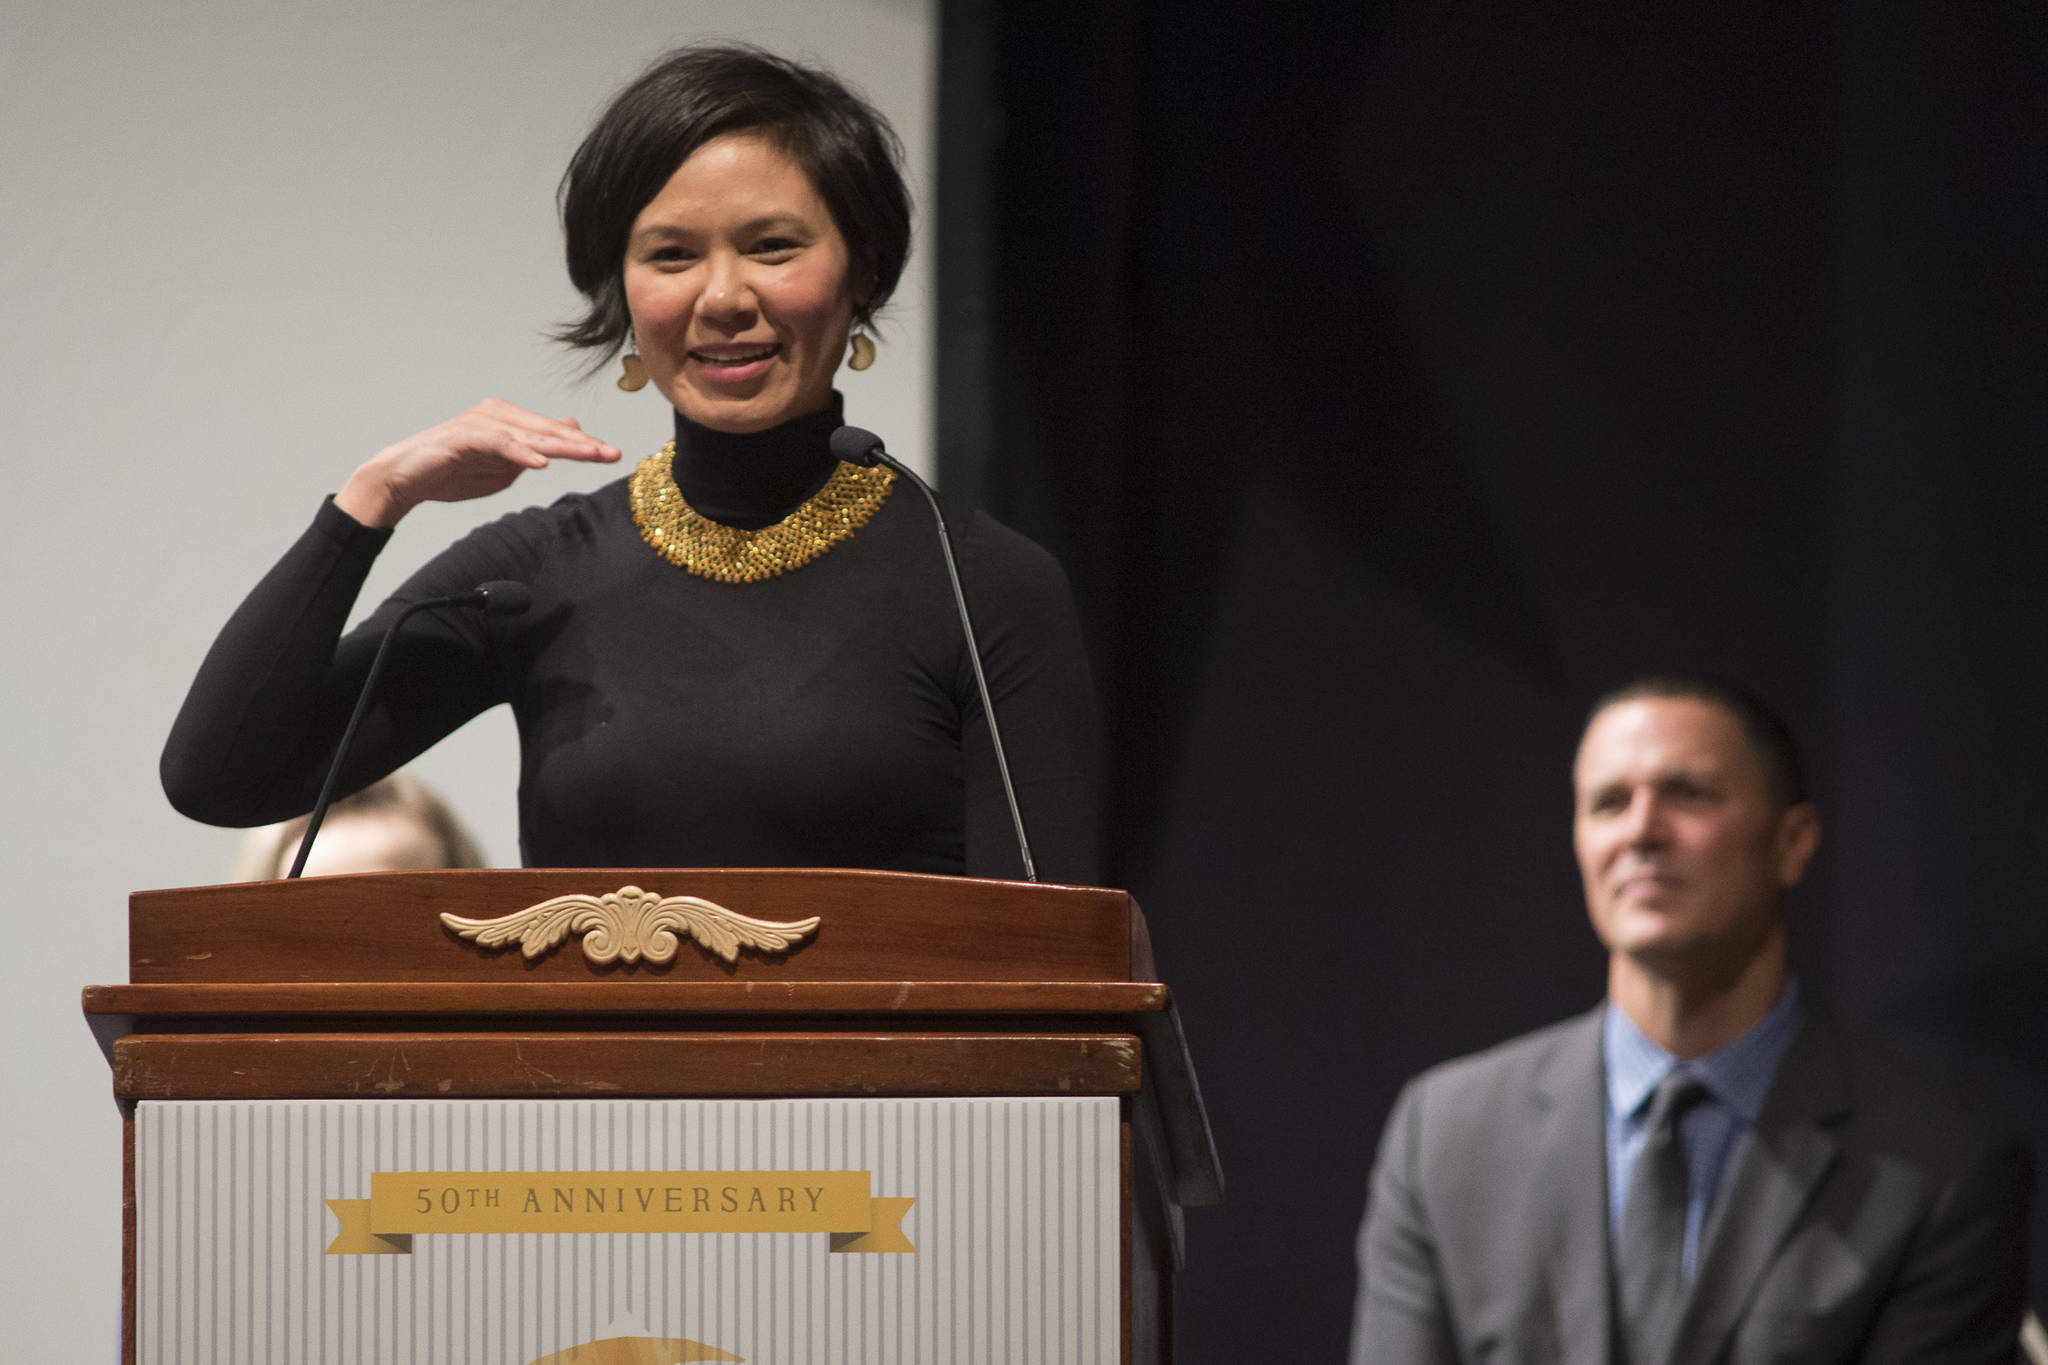 Laureli Ivanoff, of Unalakleet, receives her Distinguished Service to the Humanities Award for Leadership at the 2019 Governor’s Arts and Humanities Awards at the Juneau Arts & Culture Center on Thursday, Feb. 7, 2019. (Michael Penn | Juneau Empire)